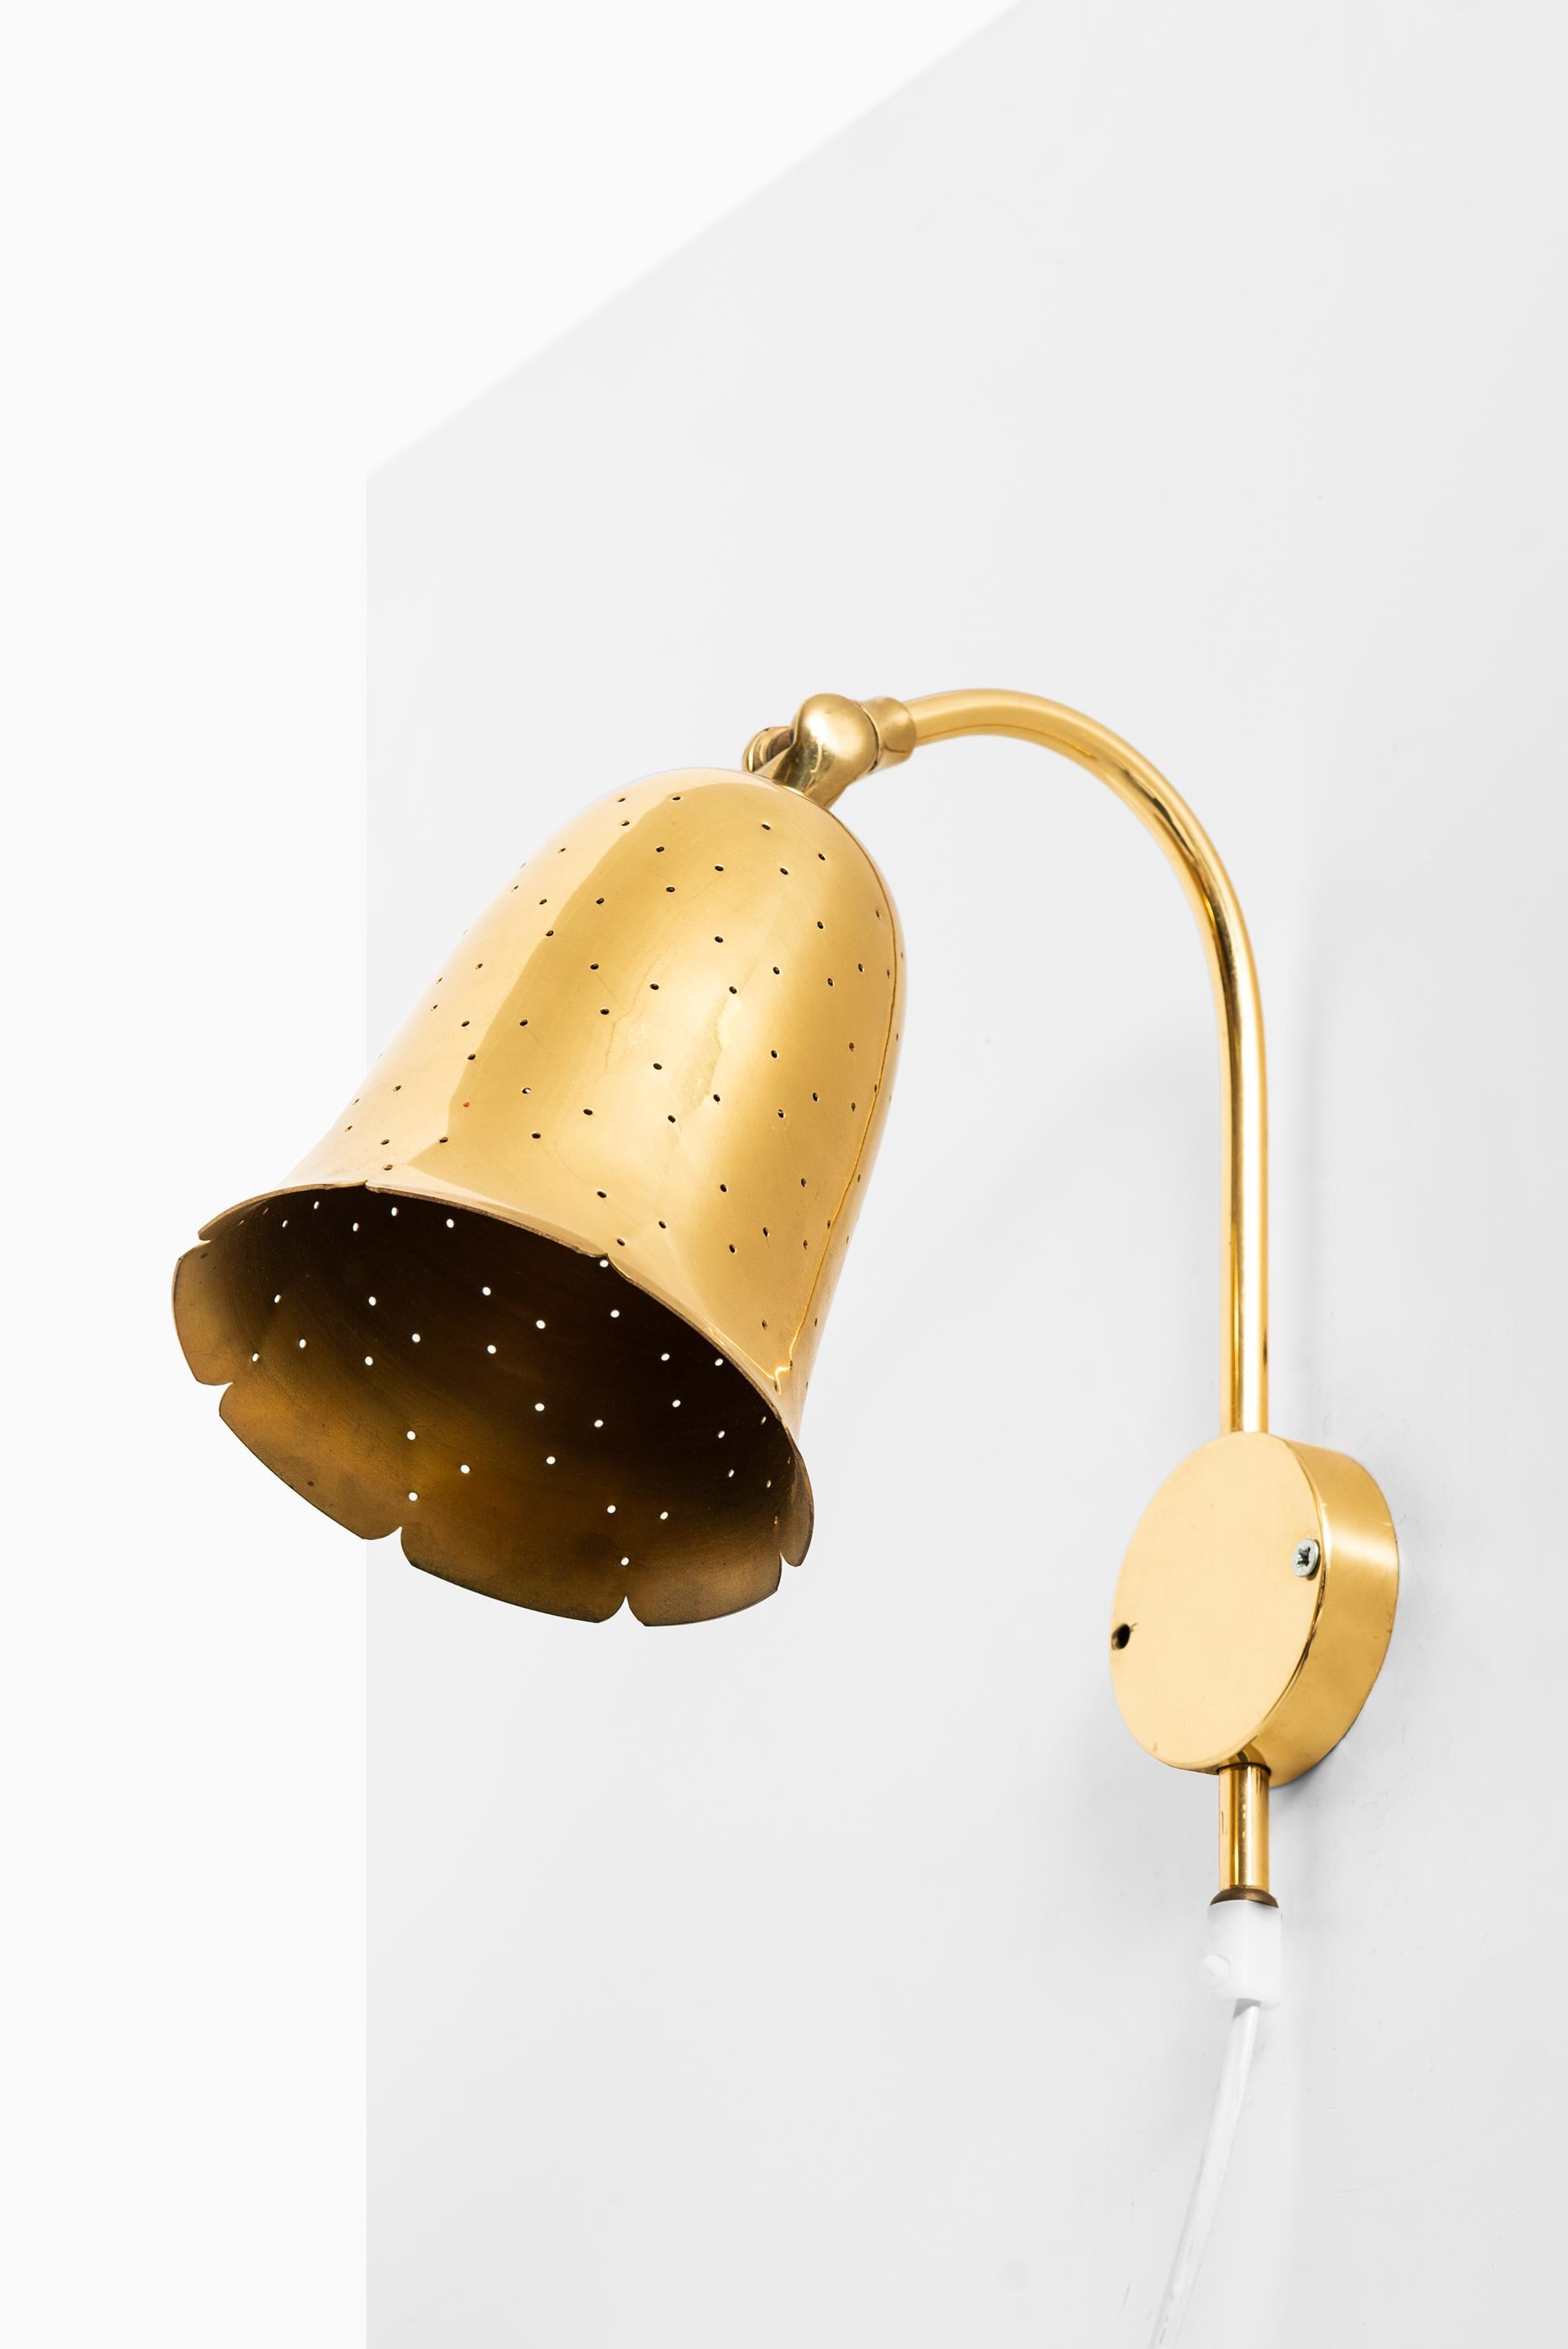 Swedish Pair of Wall Lamps in Brass Produced by Boréns in Sweden